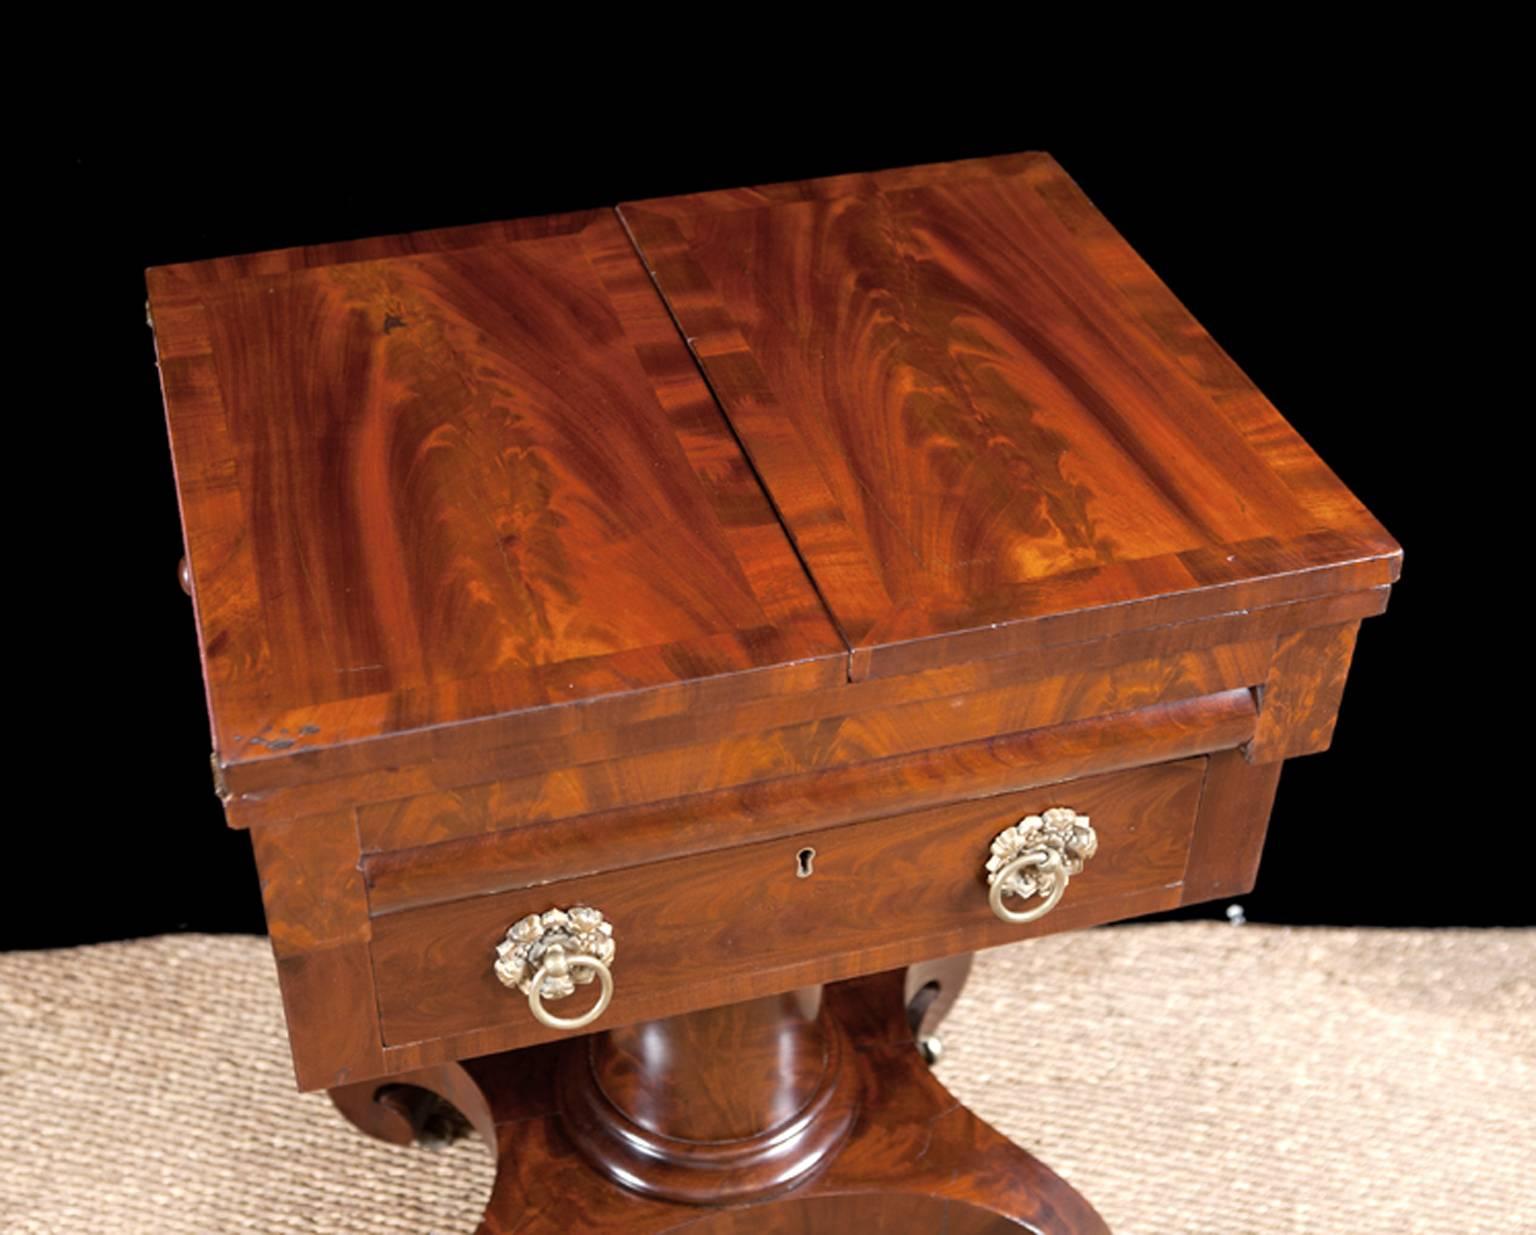 A fine work table in the Grecian Style in mahogany and figured mahogany with two drawers, the first with a convex front. Hinged-top opens to a writing surface with original burgundy baize inset. Cylinder column rests on classical scroll feet.